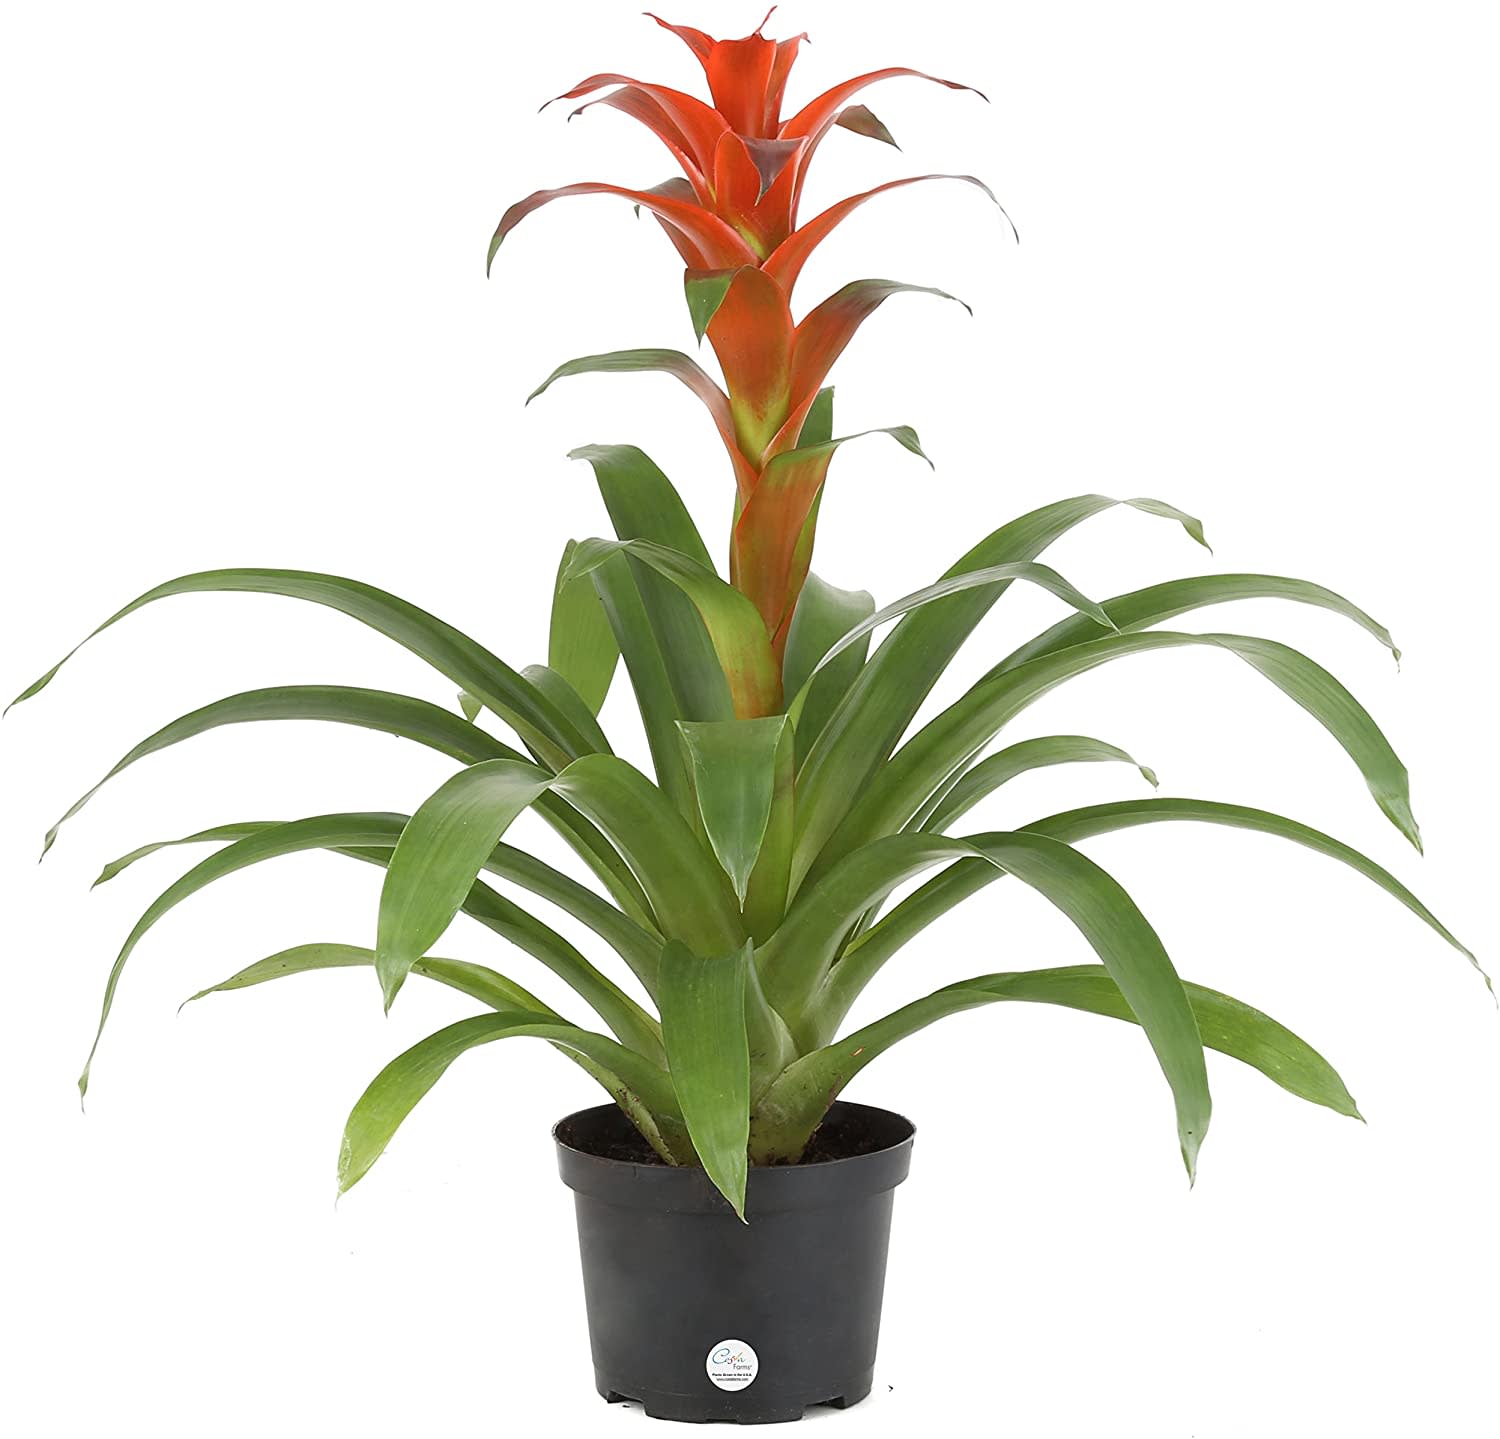 Bromeliad Plant Care How To Grow Maintain Bromeliad Apartment Therapy